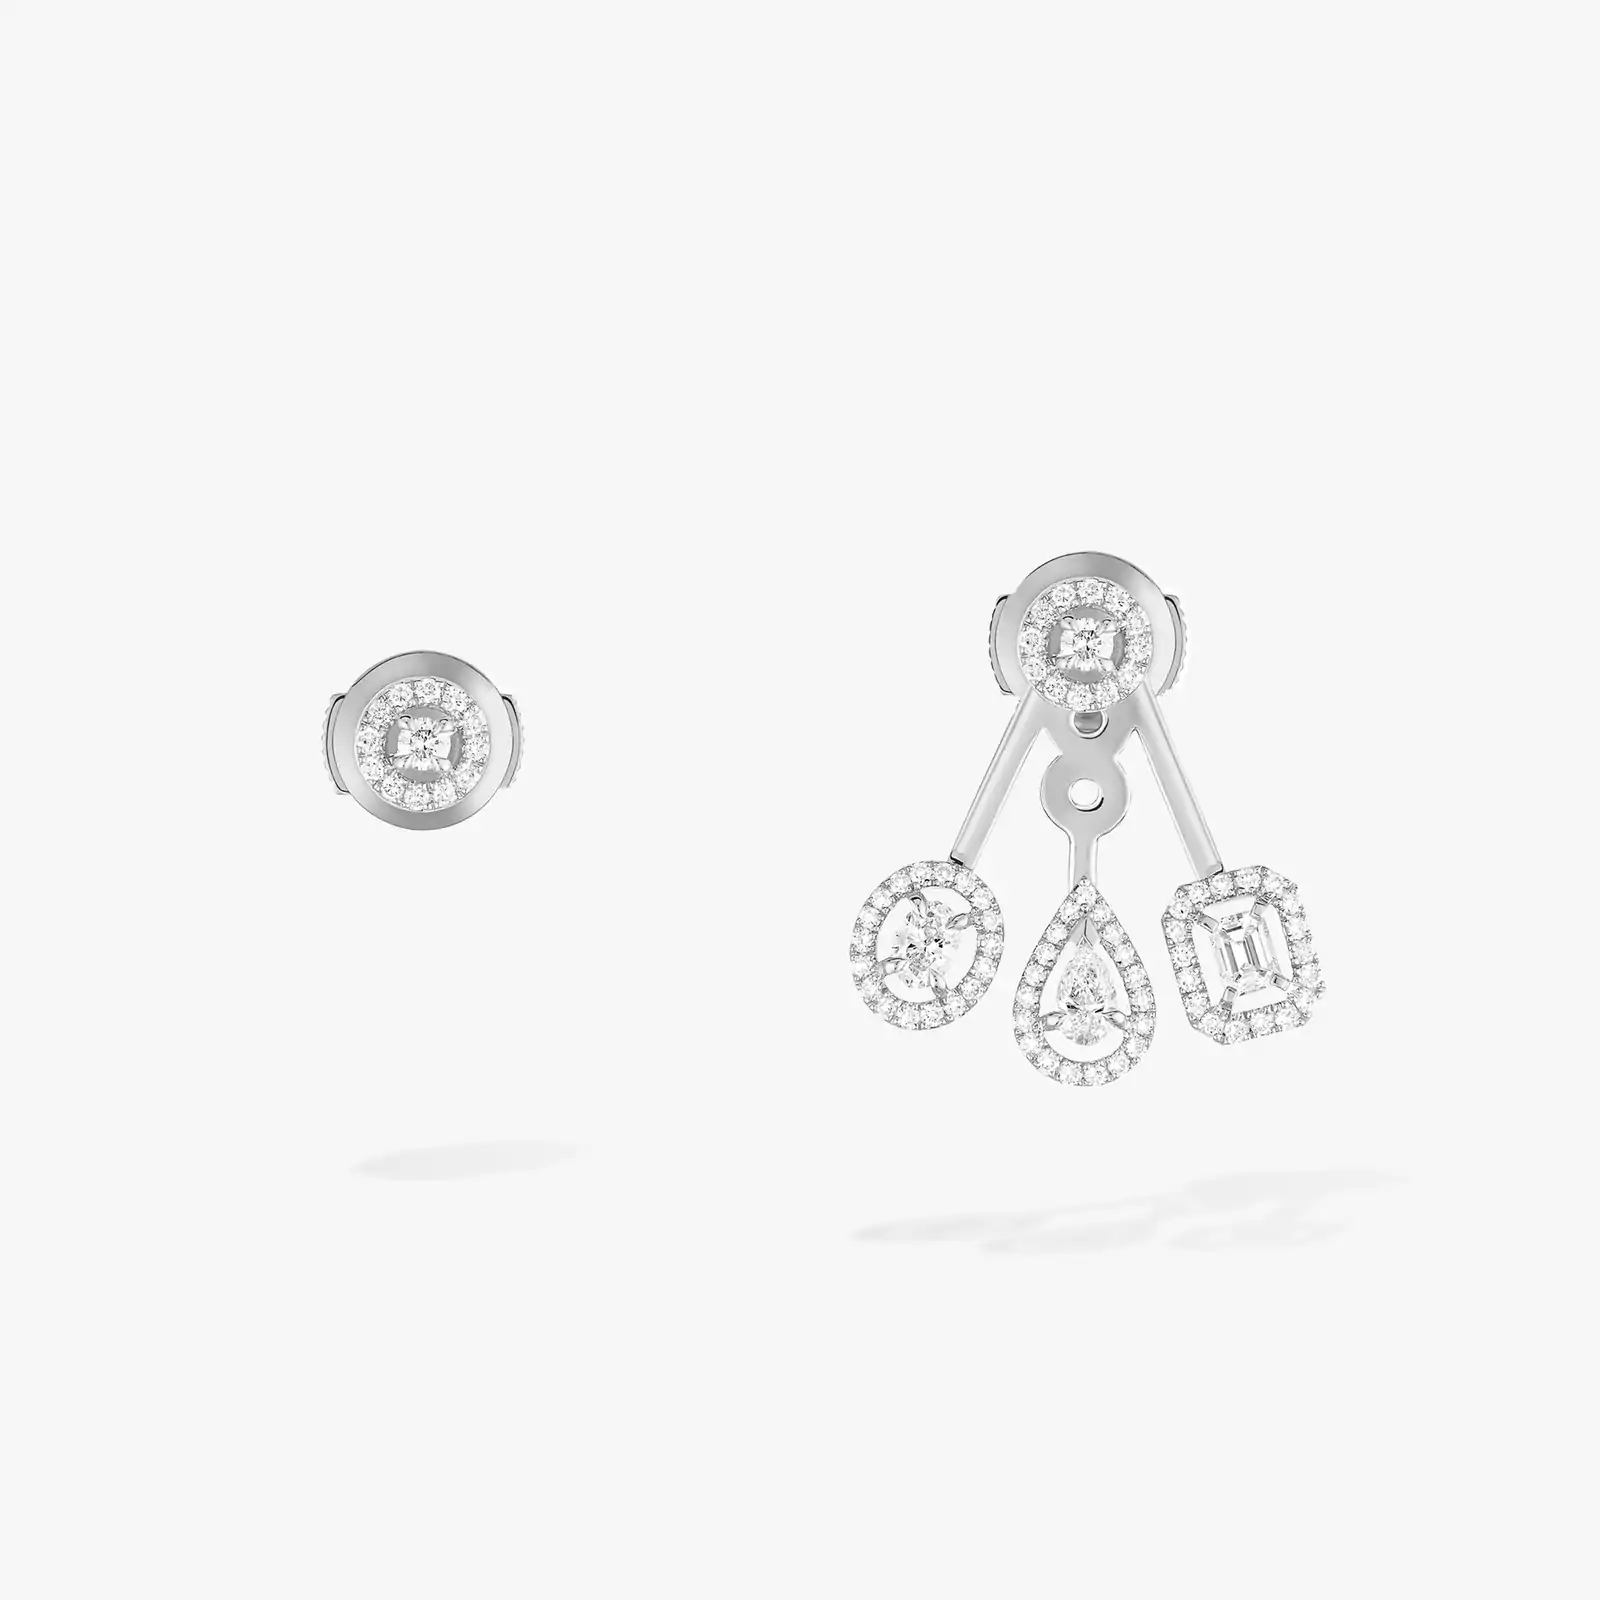 Earrings For Her White Gold Diamond My Twin Trio 06527-WG